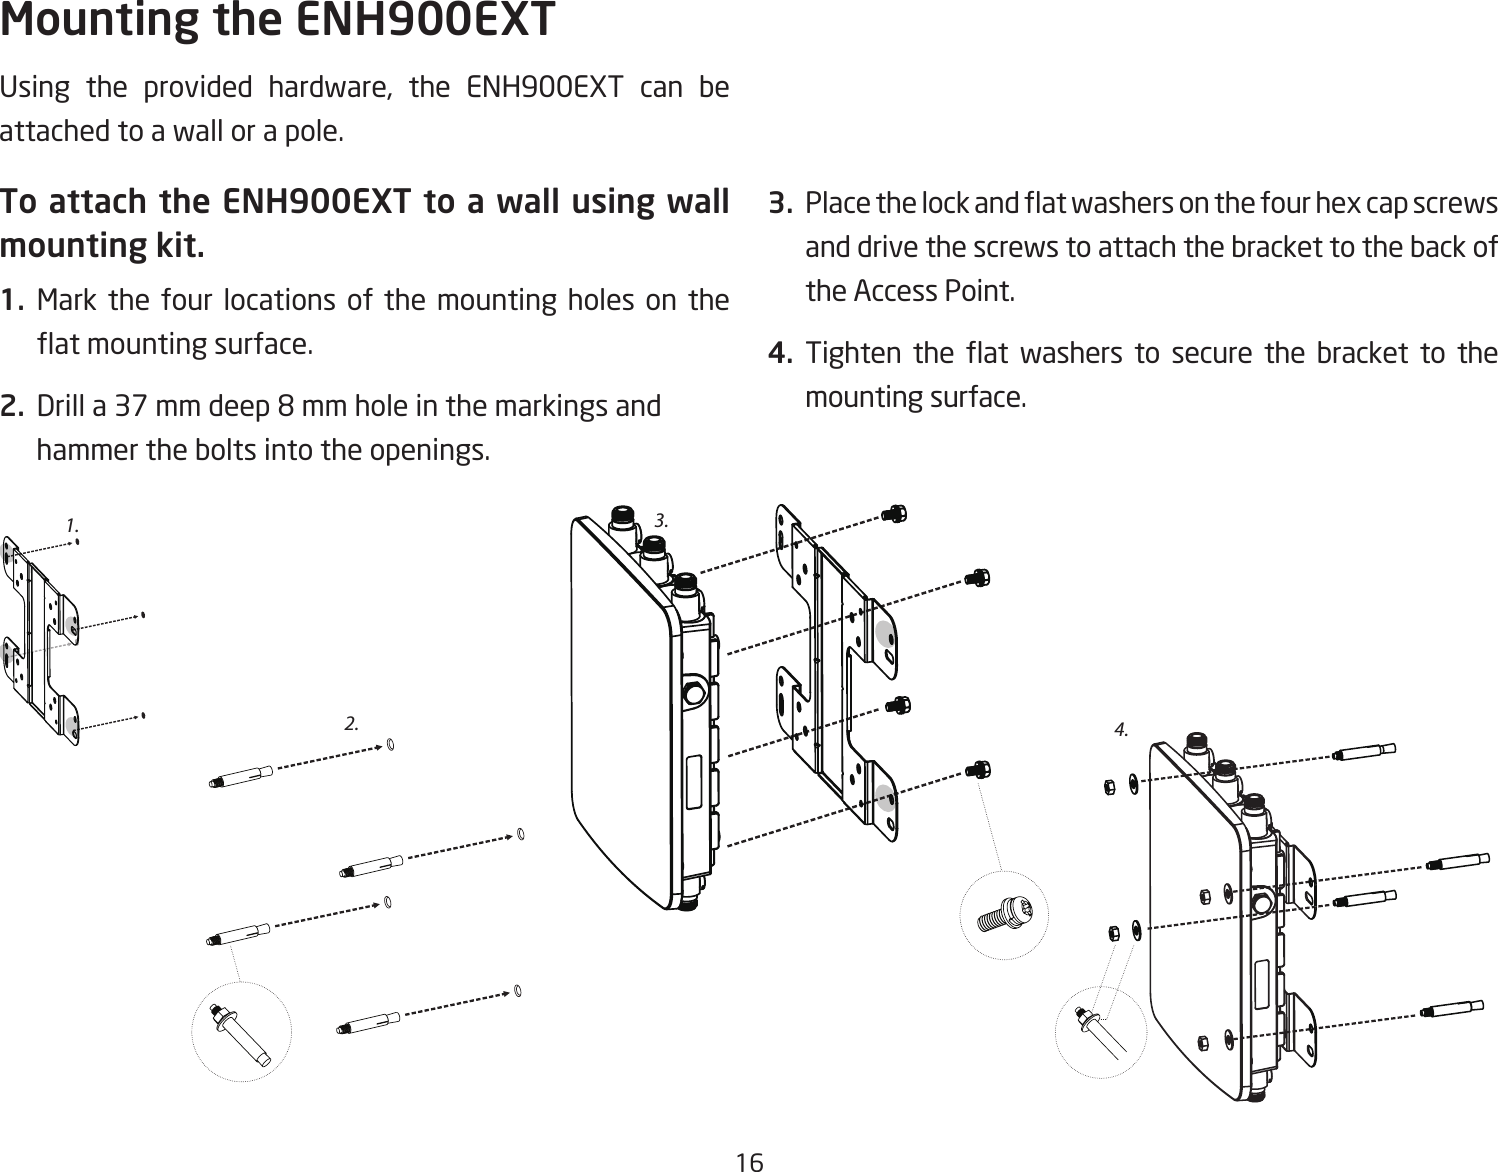 16Using the provided hardware, the ENH900EXT can beattached to a wall or a pole.To attach the ENH900EXT to a wall using wall mounting kit.1.  Mark the four locations of the mounting holes on the atmountingsurface.2. Drilla37mmdeep8mmholeinthemarkingsandhammer the bolts into the openings.3. Placethelockandatwashersonthefourhexcapscrewsand drive the screws to attach the bracket to the back of the Access Point.4. Tighten the at washers to secure the bracket to themounting surface.Mounting the ENH900EXT2.3.4.1.